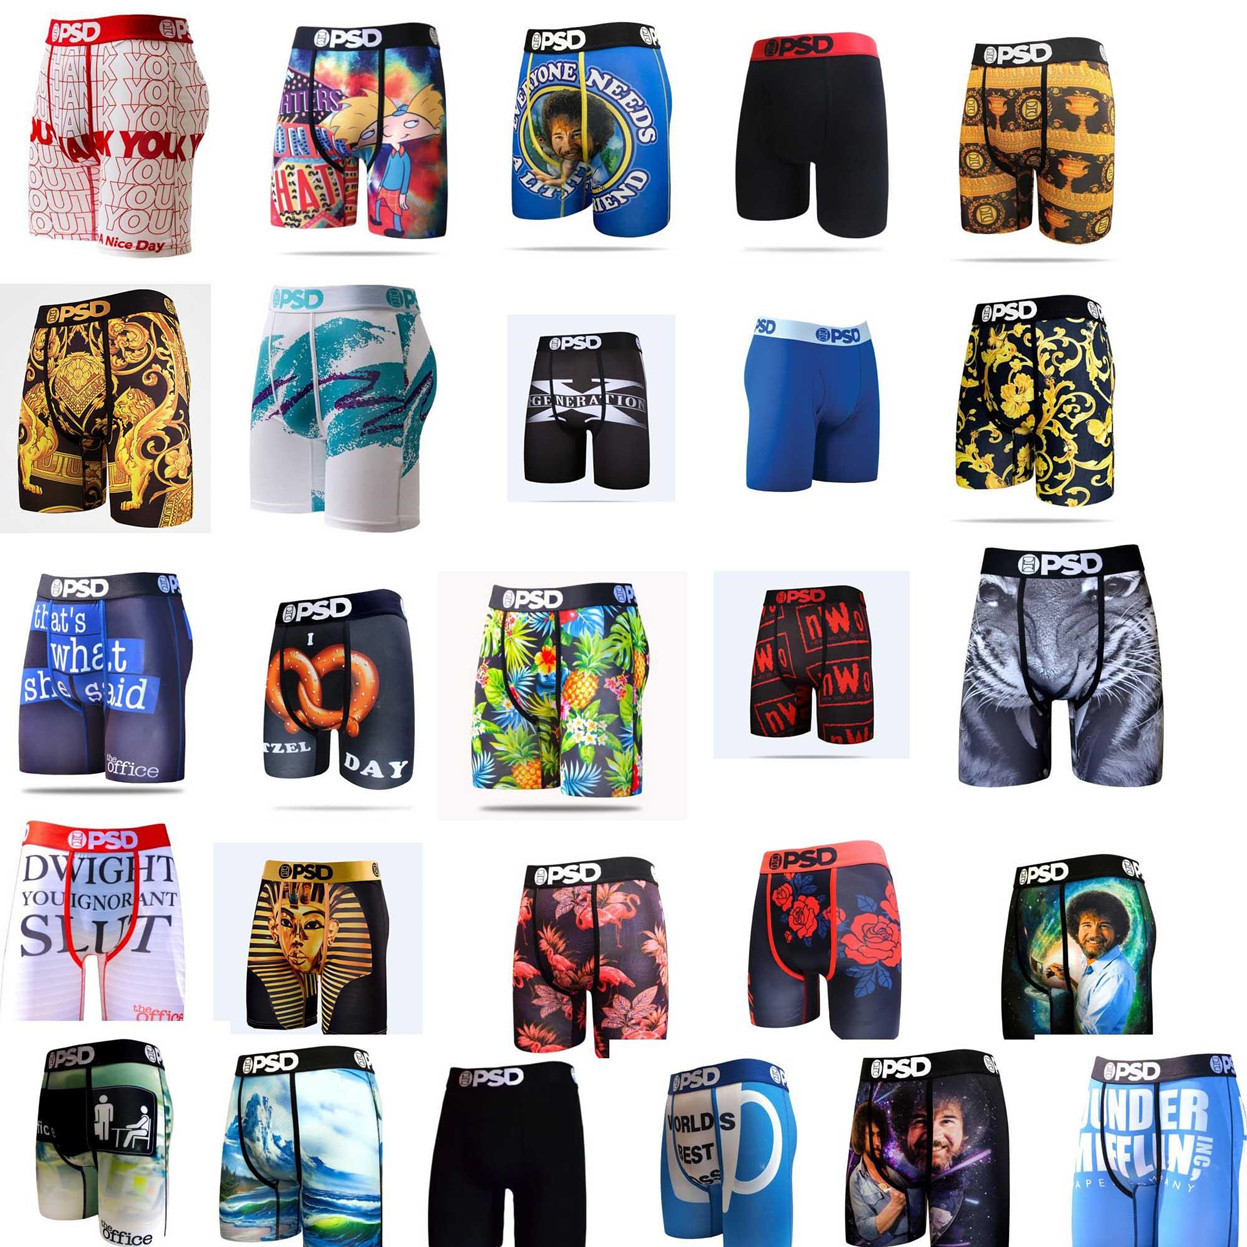 

underpant PSD Men's Underwear boxer Comfortable men underwear boxers High Quality Quickly Dry underwears American size S-XL822, Mixed color(underwear)